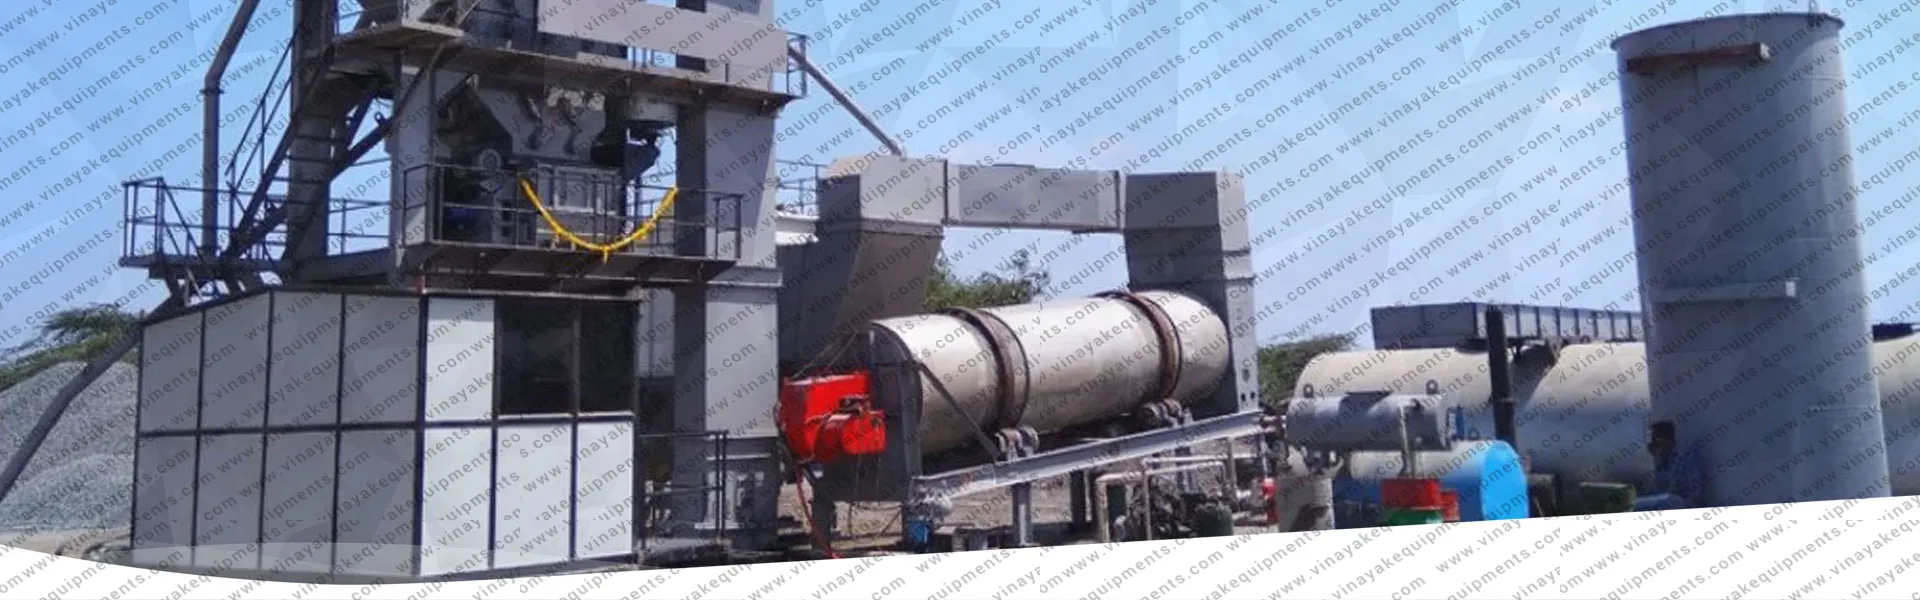 Asphalt Drum Mixing Plant Exporters from India,Ahmedabad